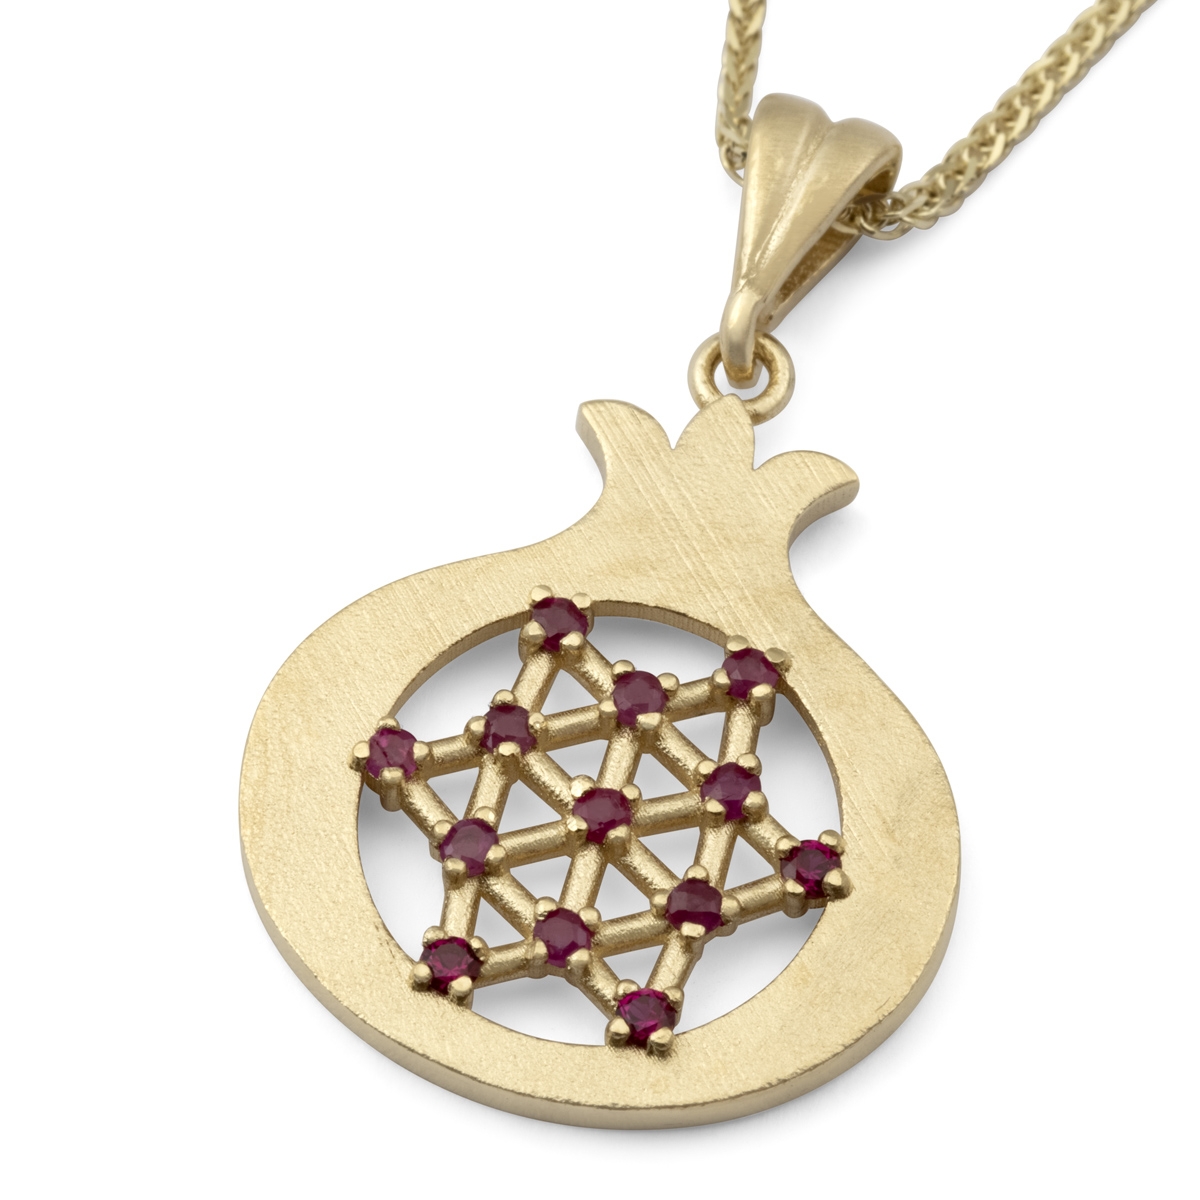 14K Yellow Gold Pomegranate Pendant Necklace With Star of David Design - 1